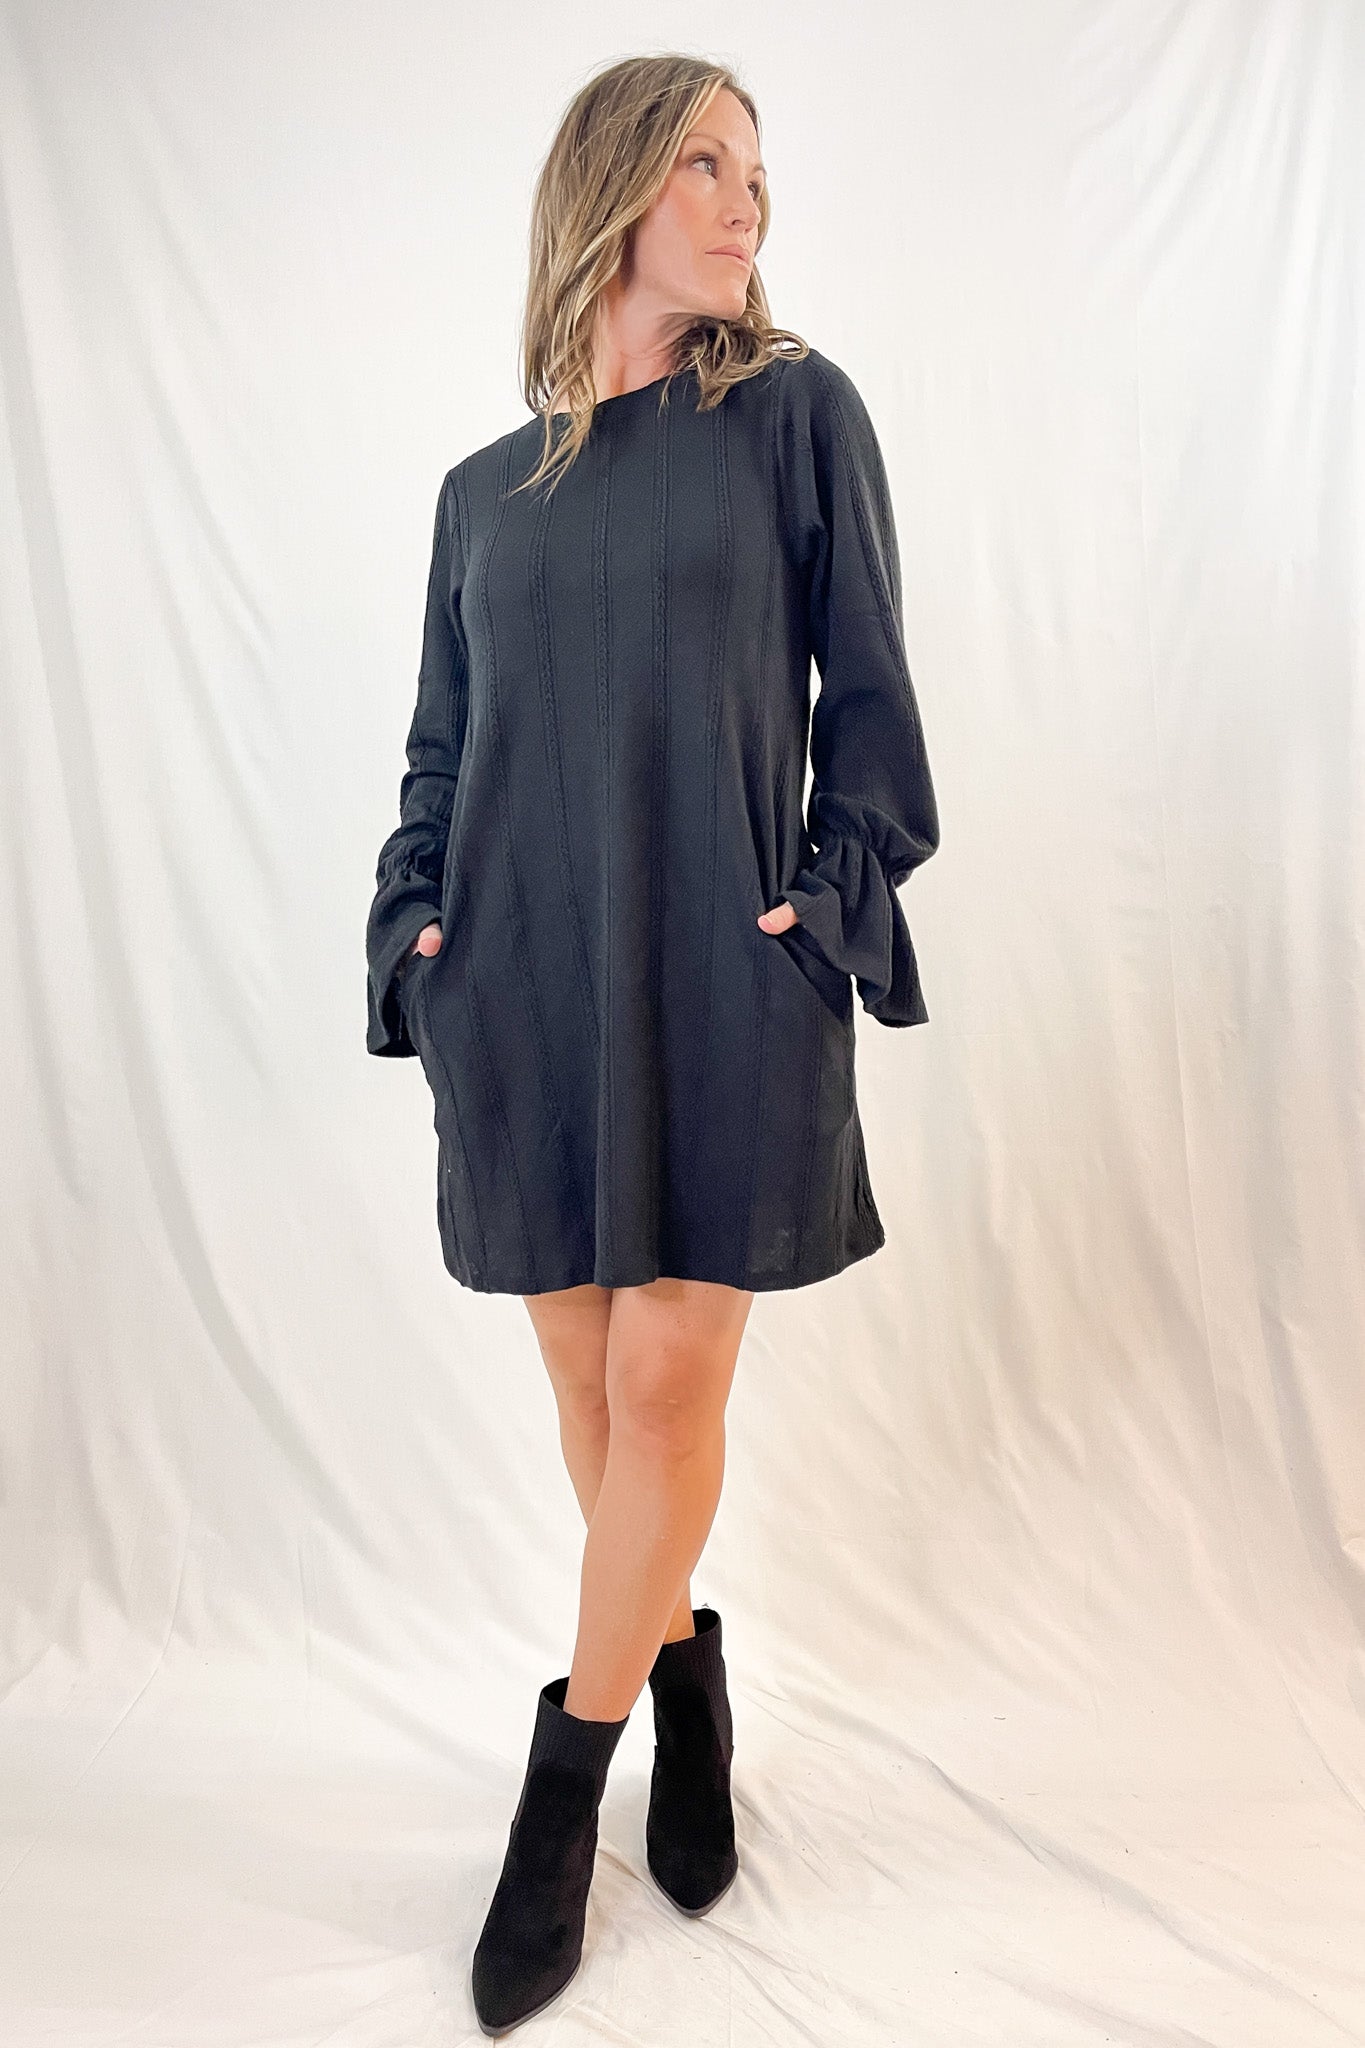 Textured Knit Bell Sleeve Dress | 5 Colors